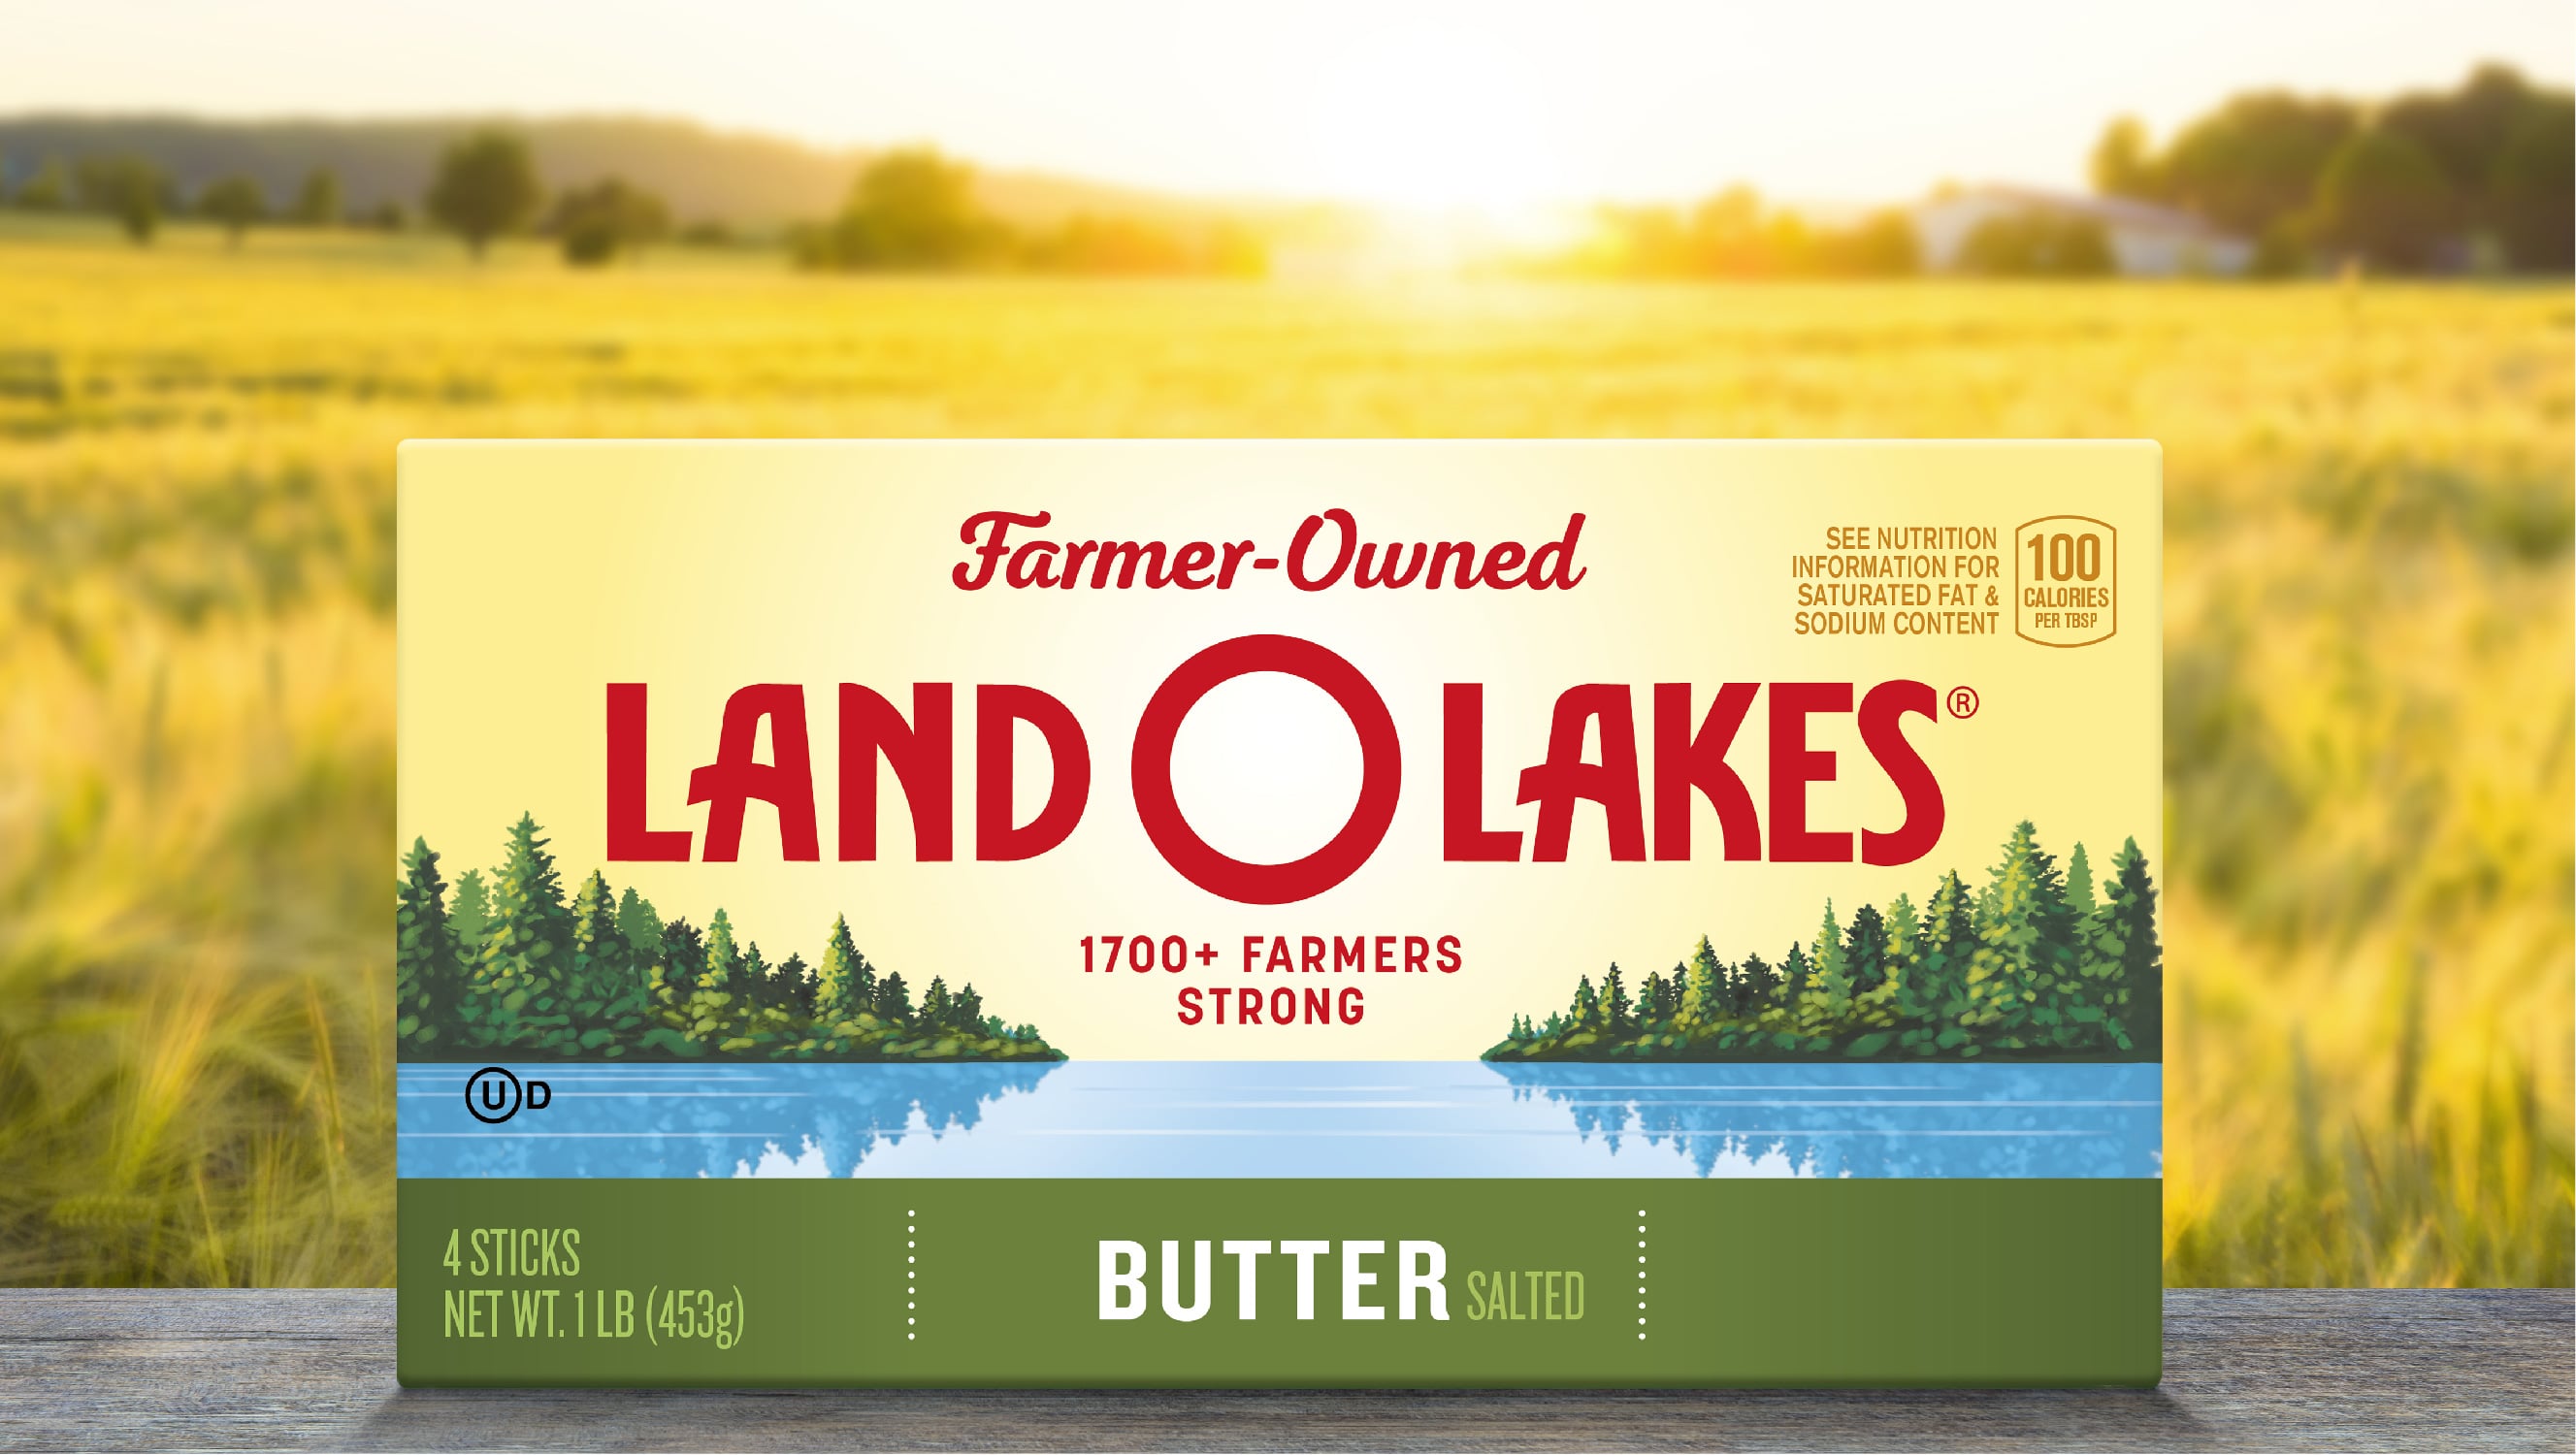 CBX Refreshes Land O’Lakes Pack and Story